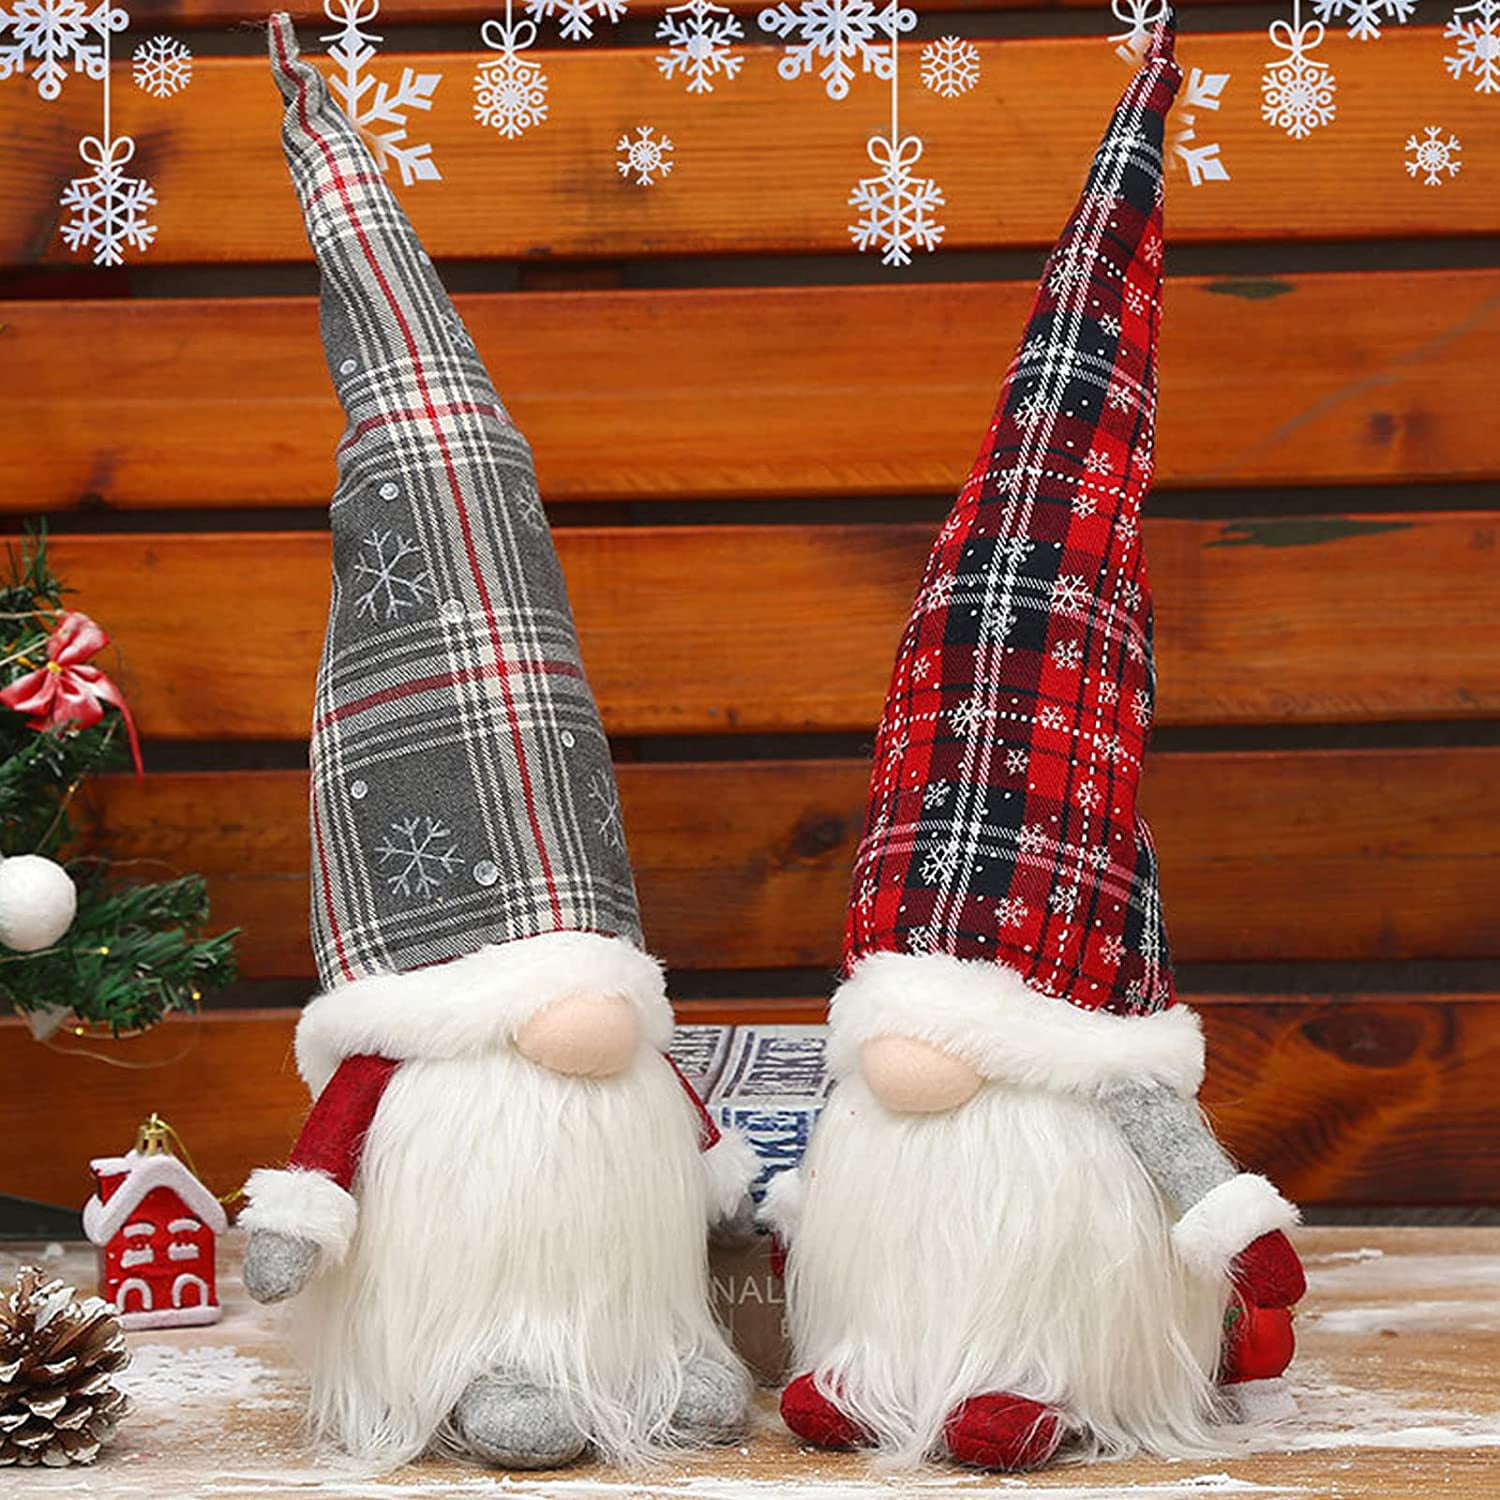 Santa Gnome Plush Doll,Santa Claus Plush Elf Toy Faceless Santa Doll Window Decoration Christmas Decorations,Lovely Gift Ornaments to Add Festive Atmosphere 3-Pack